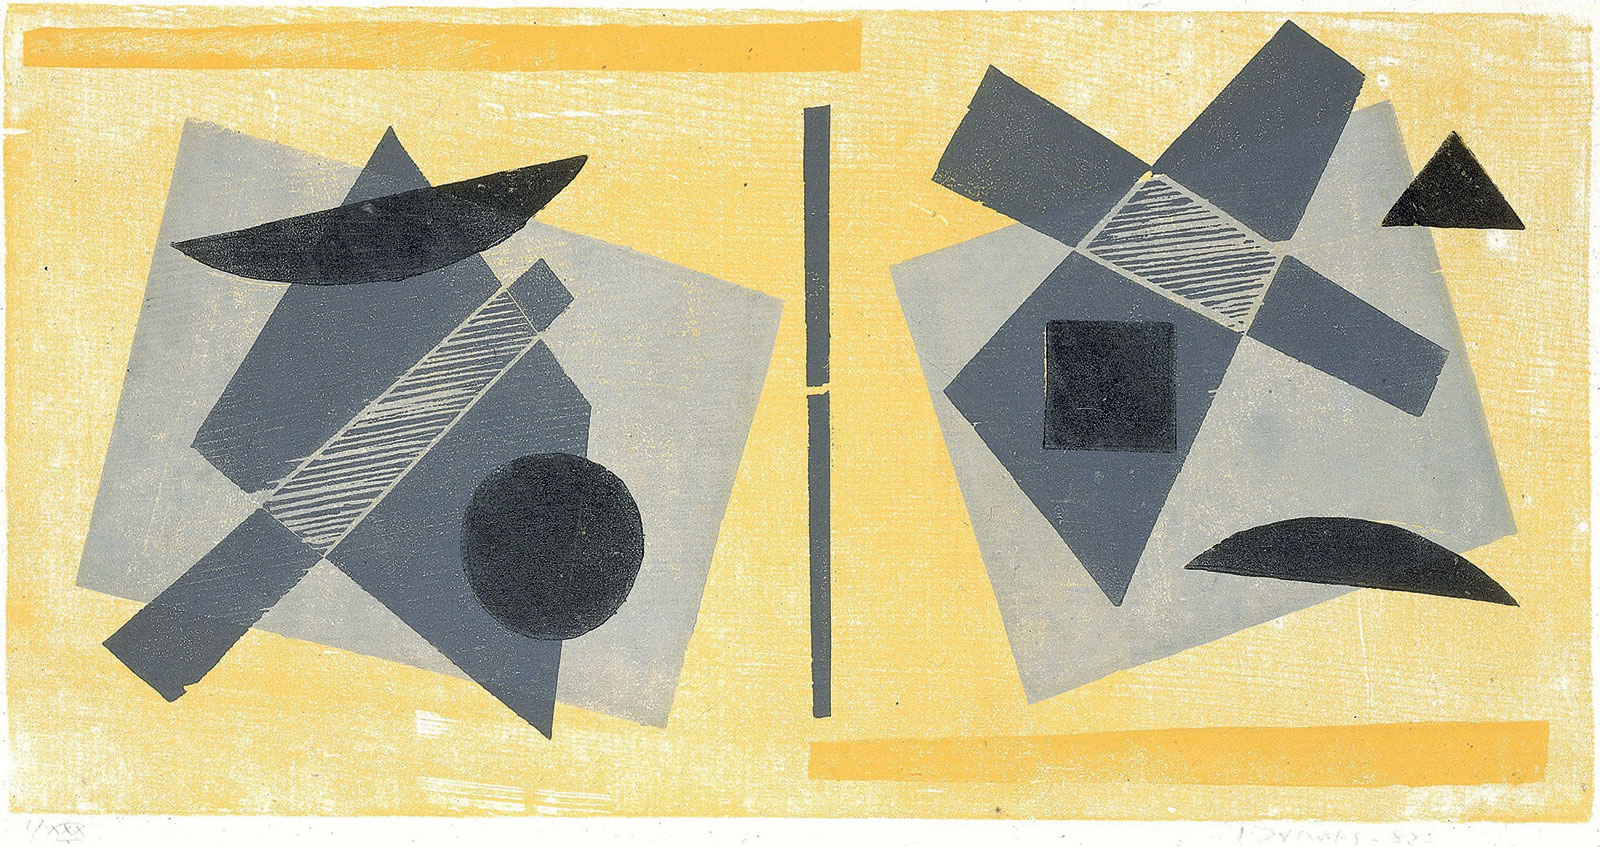 Werner Drewes, *Twin Formation in Gray*, 1982. ©Smithsonian American Art Museum